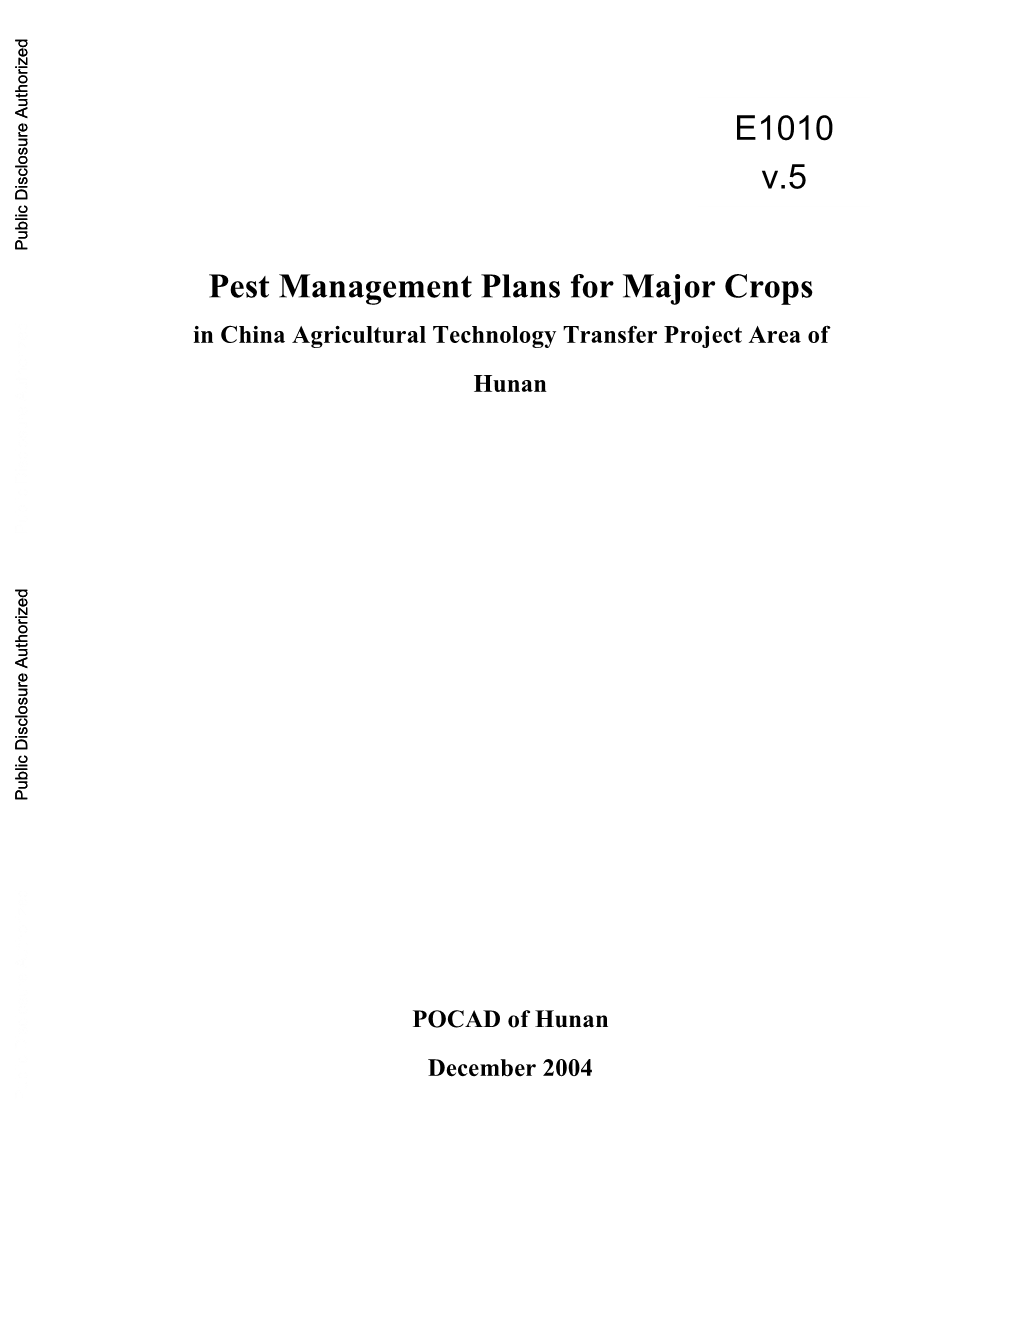 Pest Management Plans for Major Crops in China Agricultural Technology Transfer Project Area of Hunan